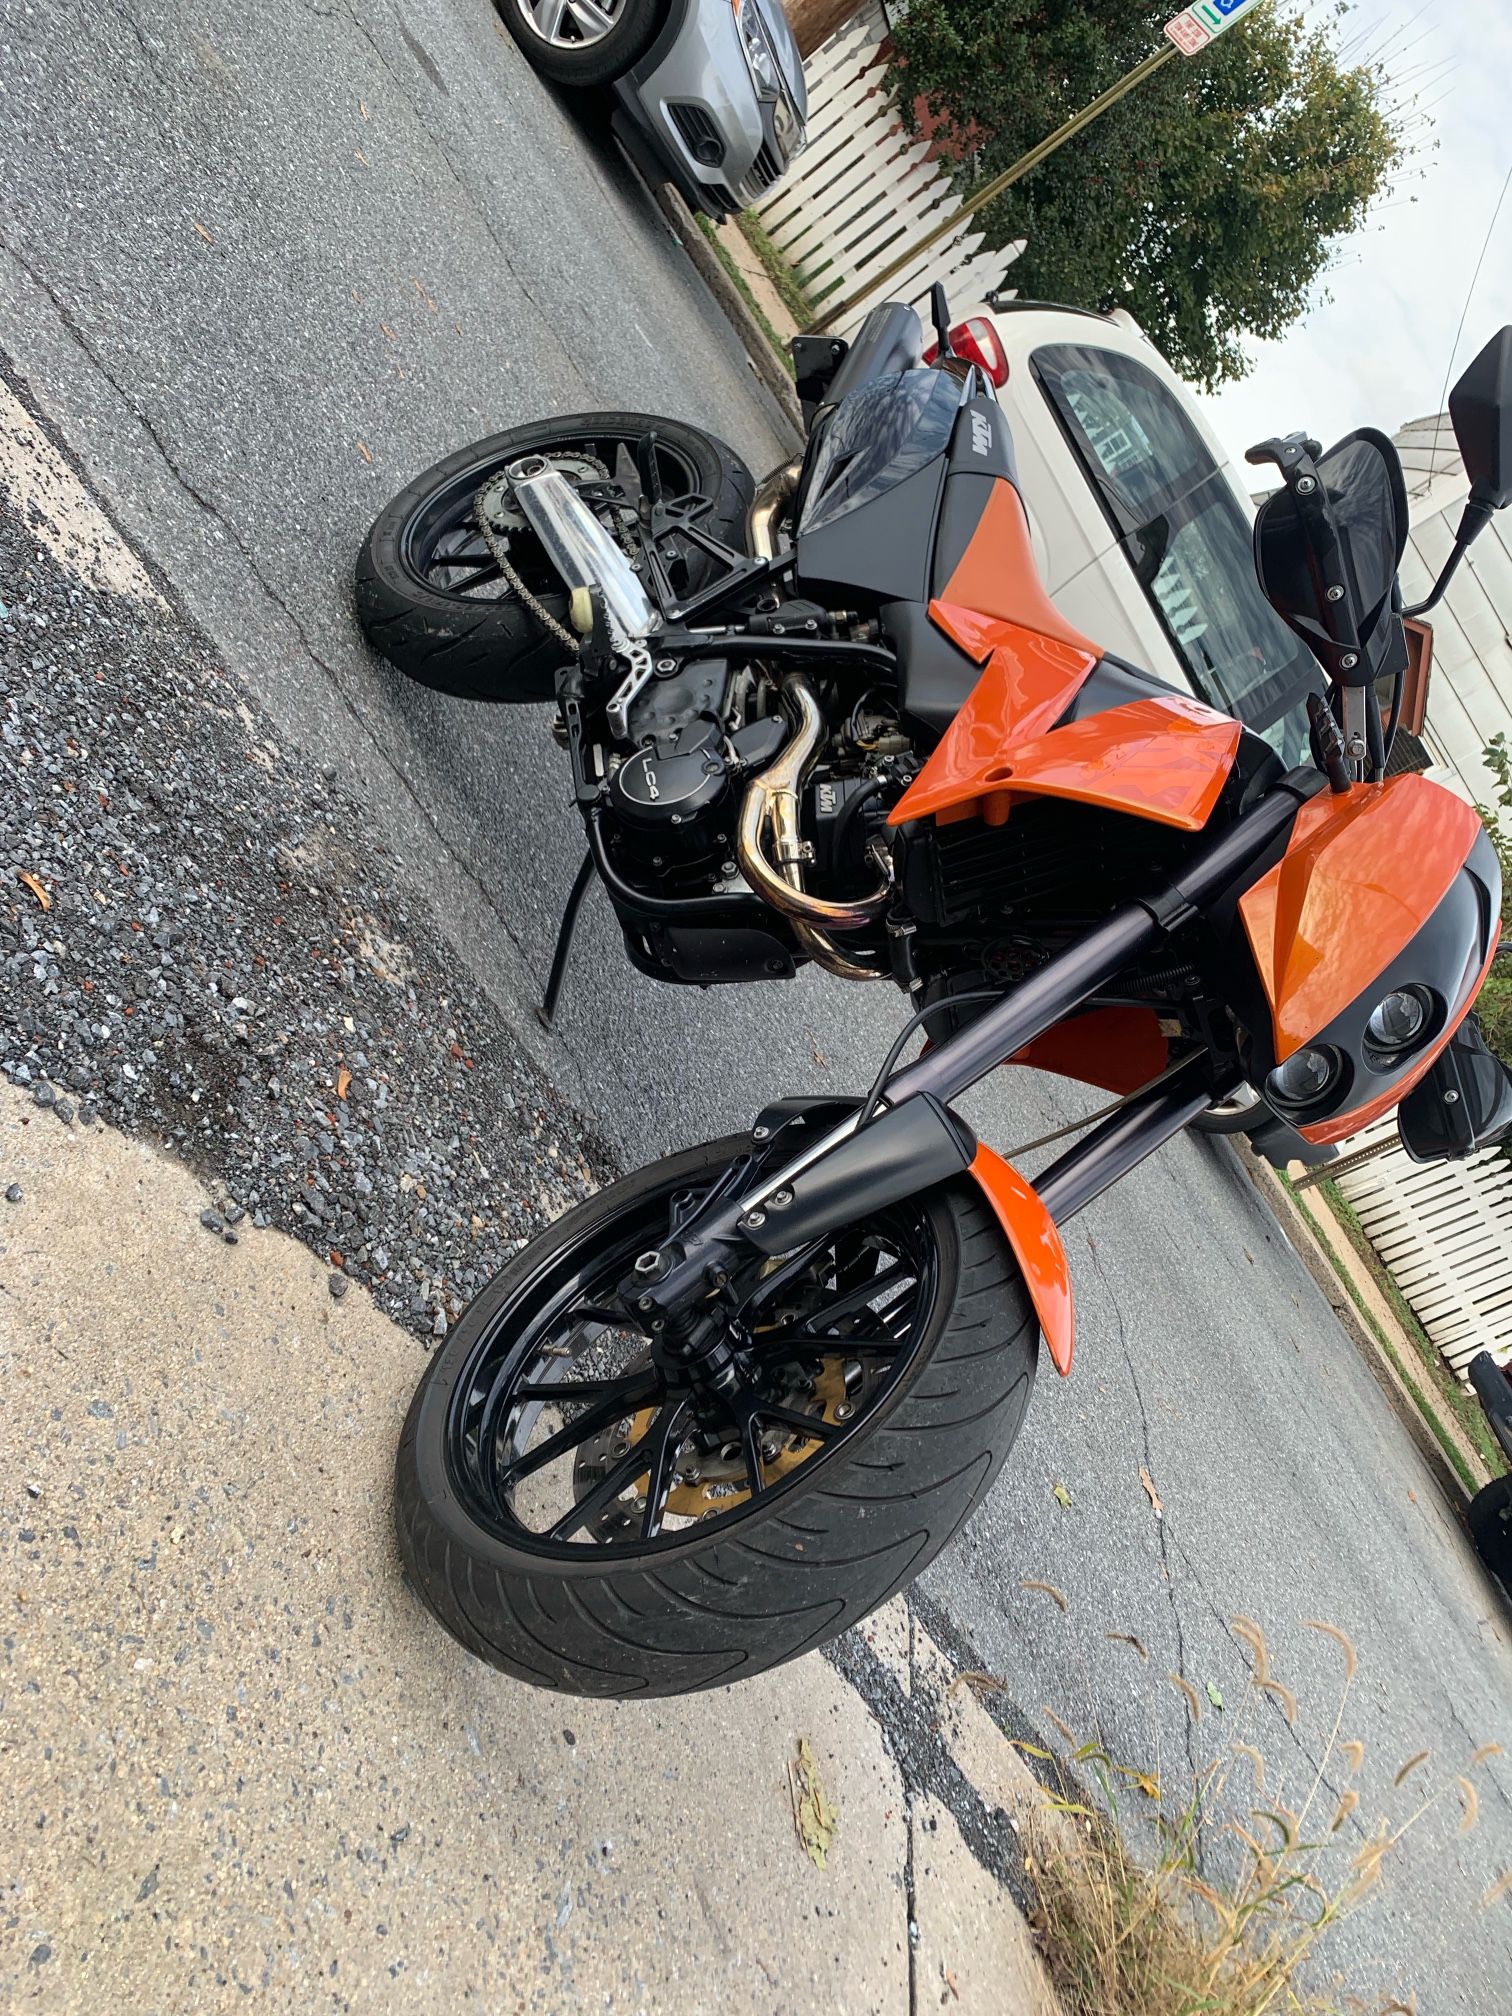 Selling my supermoto 2002 KTM Duke II LC4. Engine size 640.The bike is in great condition and is ready to ride. The bike has been meticulously maintai